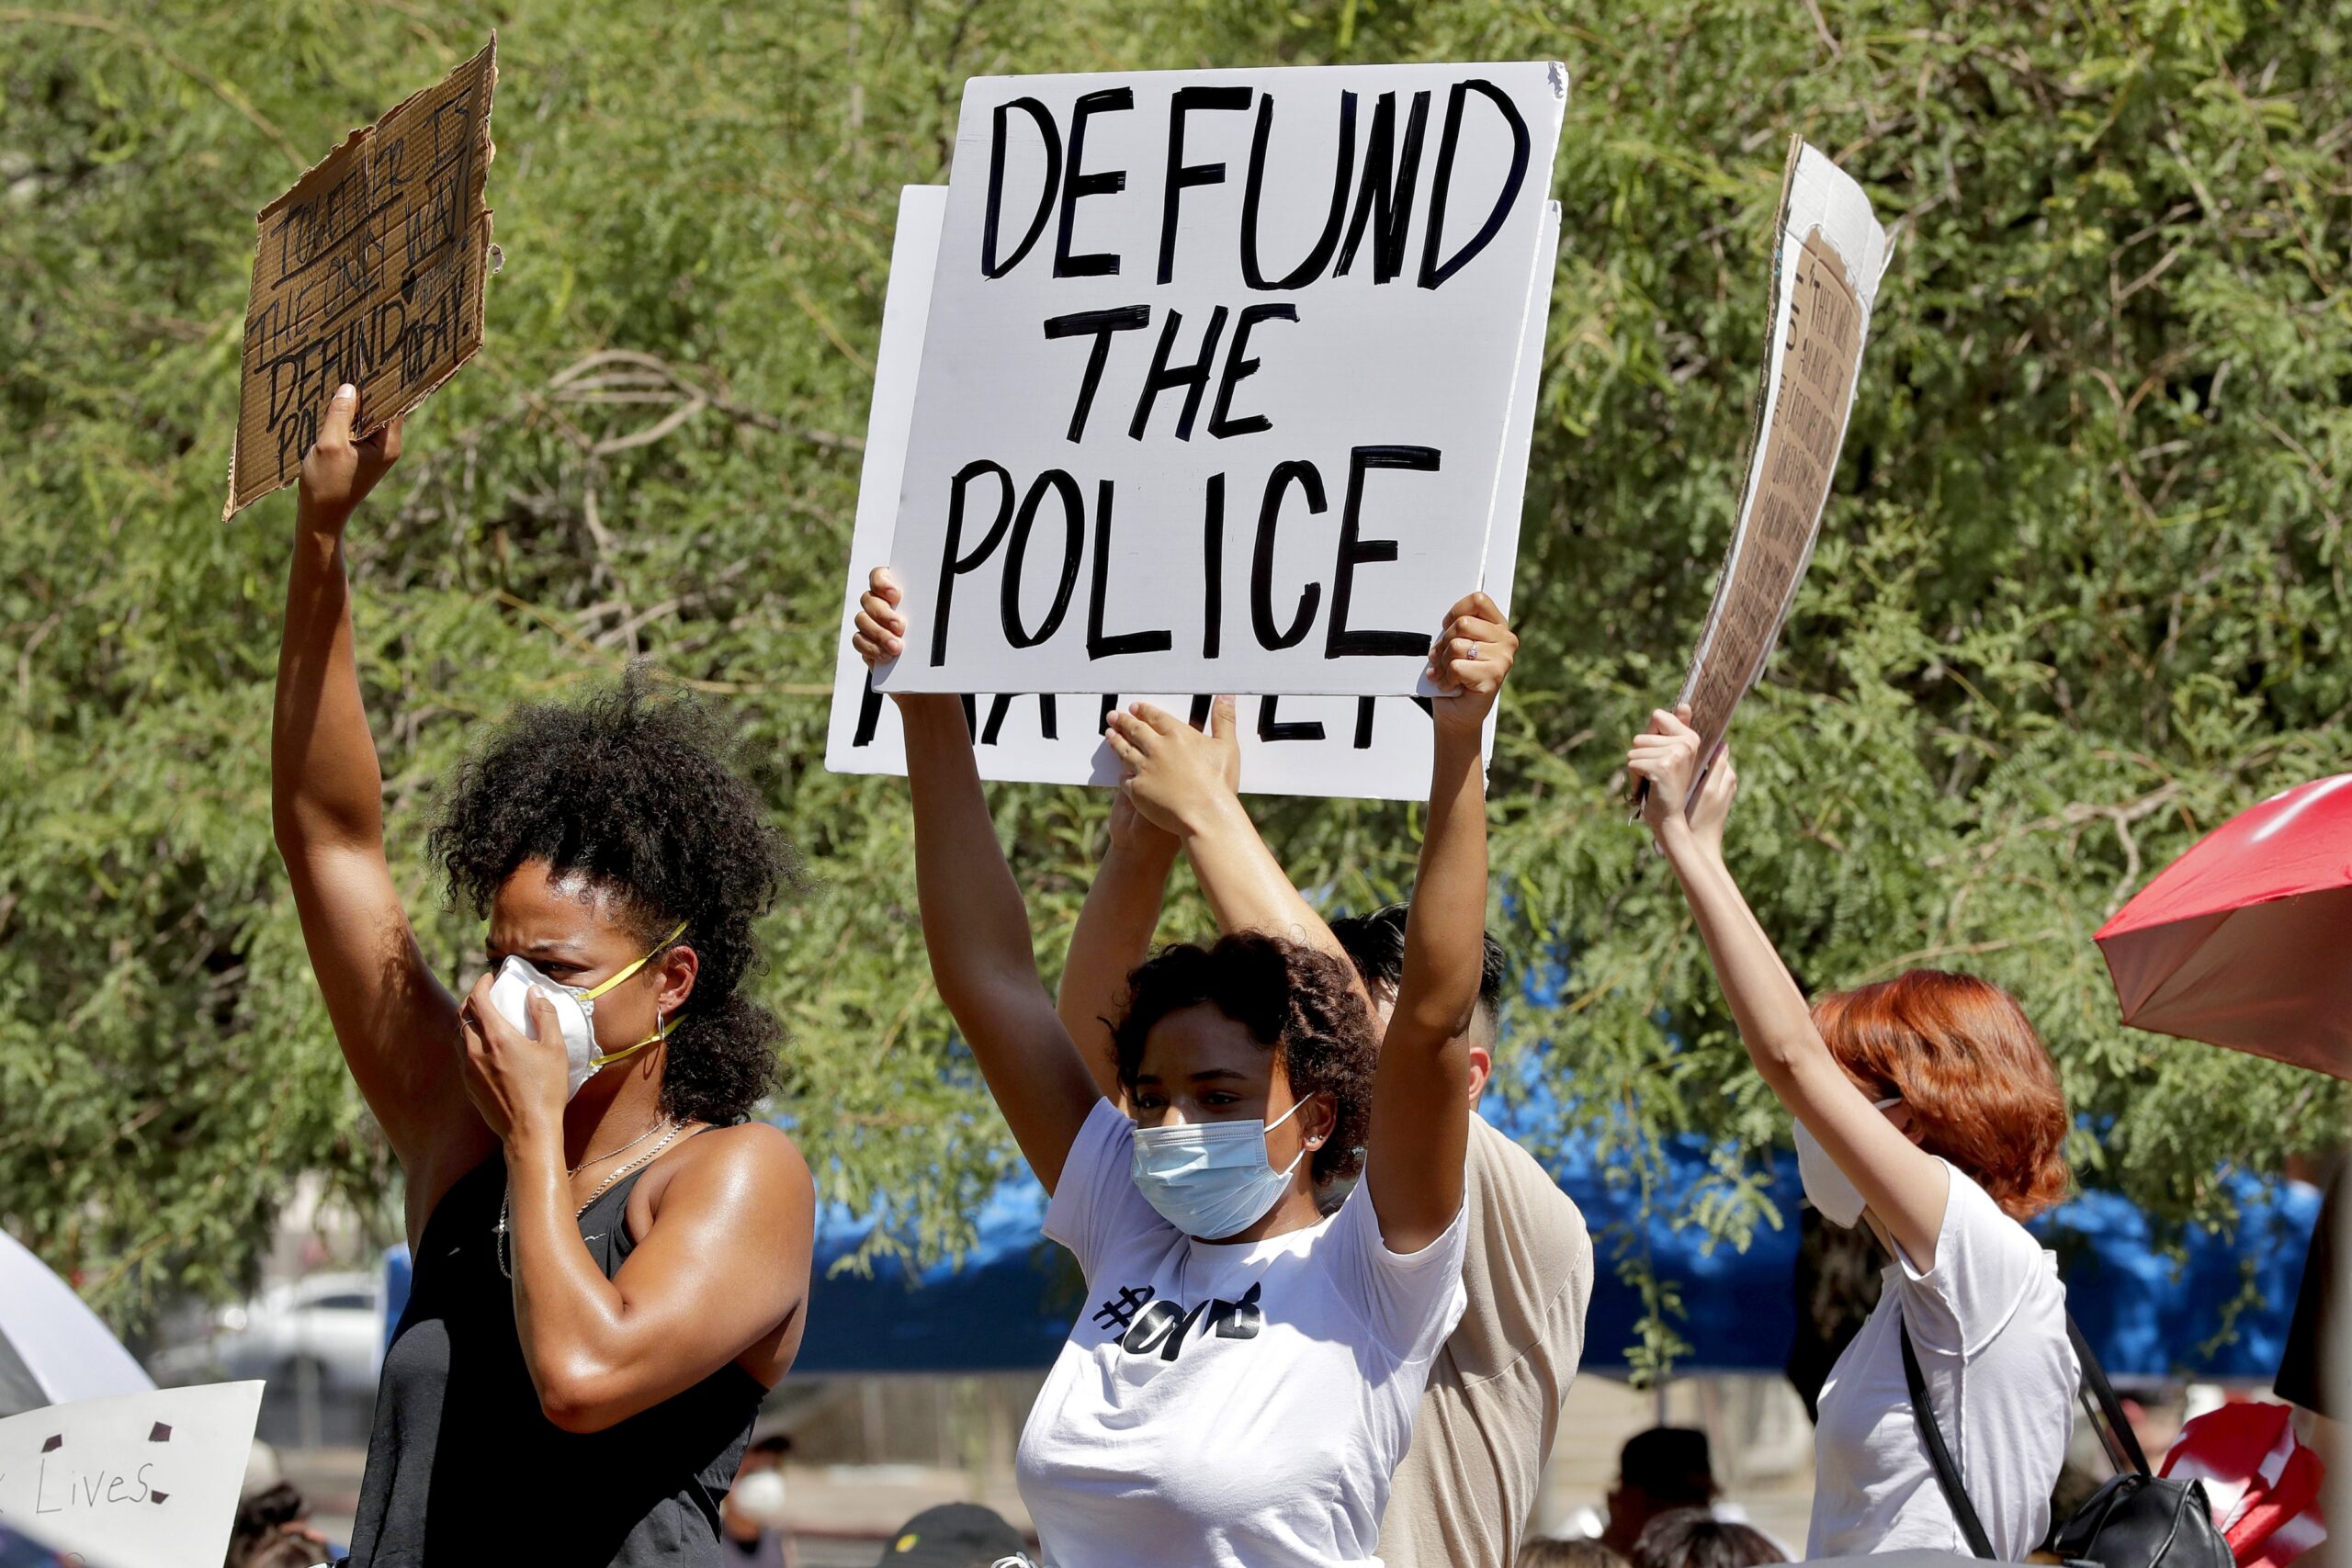 As Cries To Defund Police Rise, Milwaukee Police Chief Calls For Unity